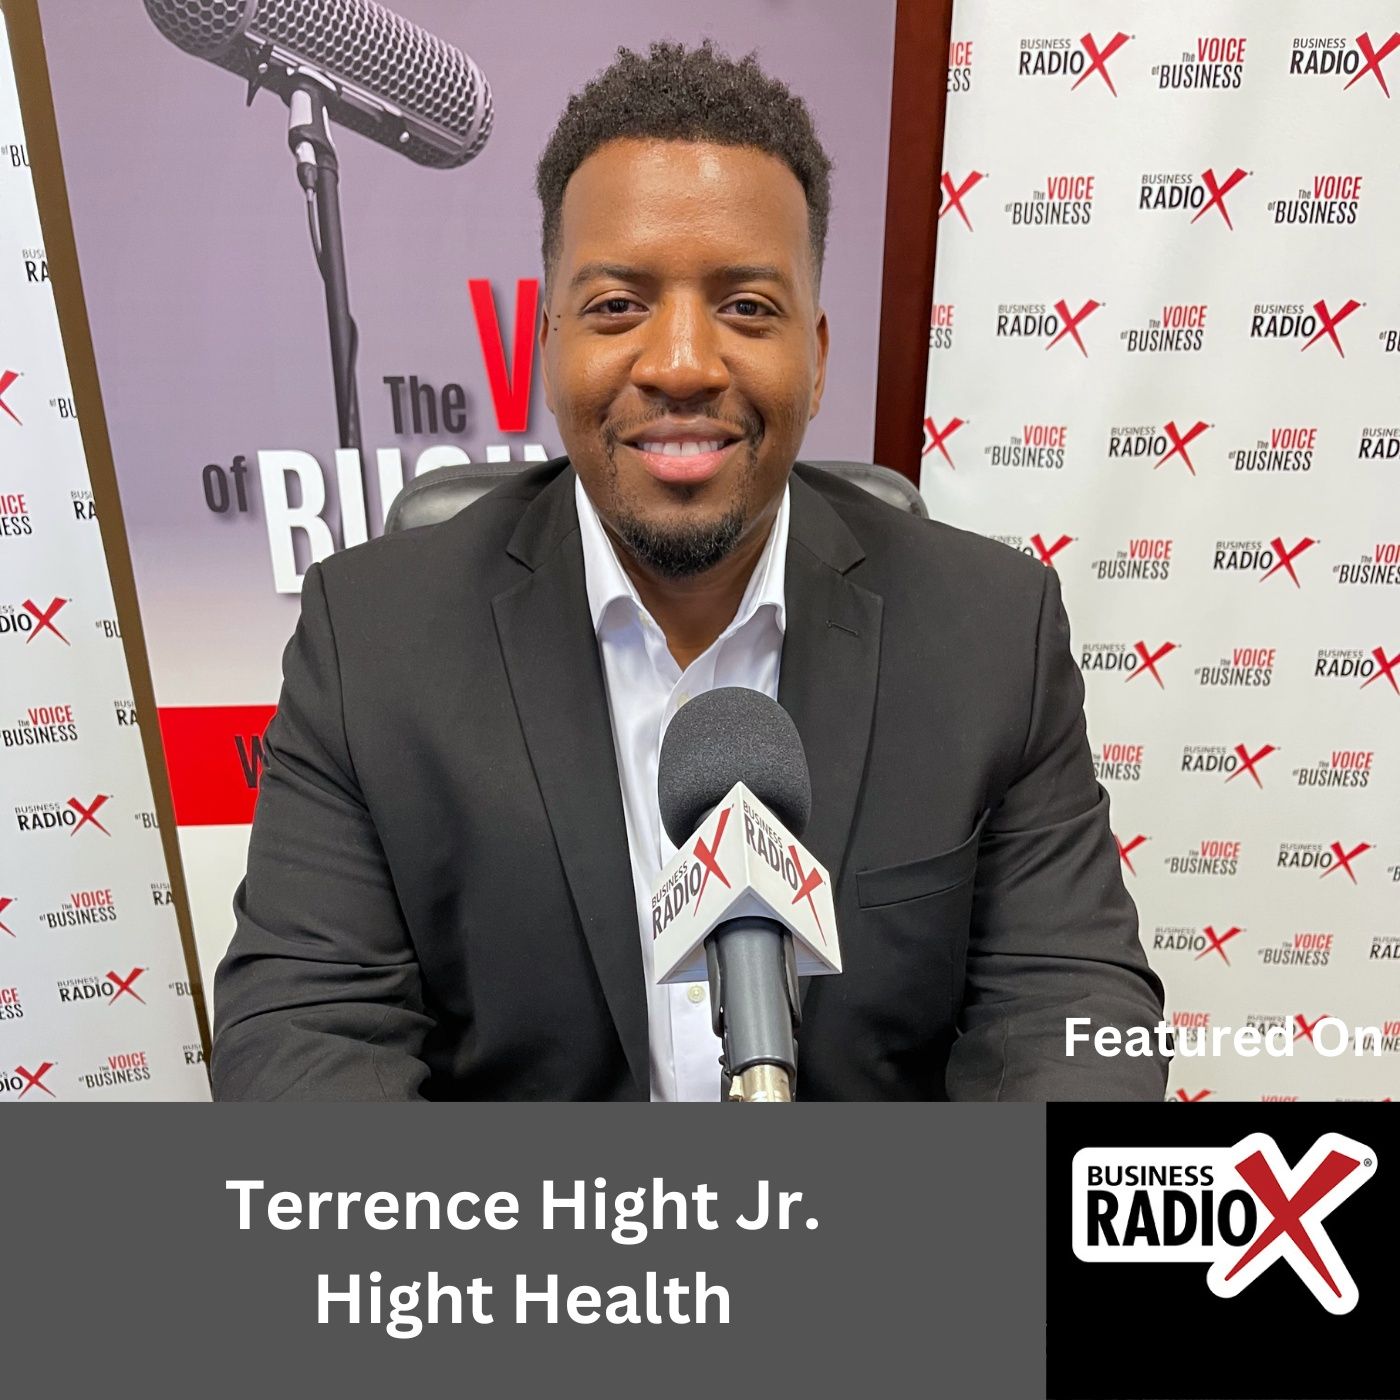 Connecting Underserved Communities to Healthcare, with Terrence Hight Jr., Hight Health